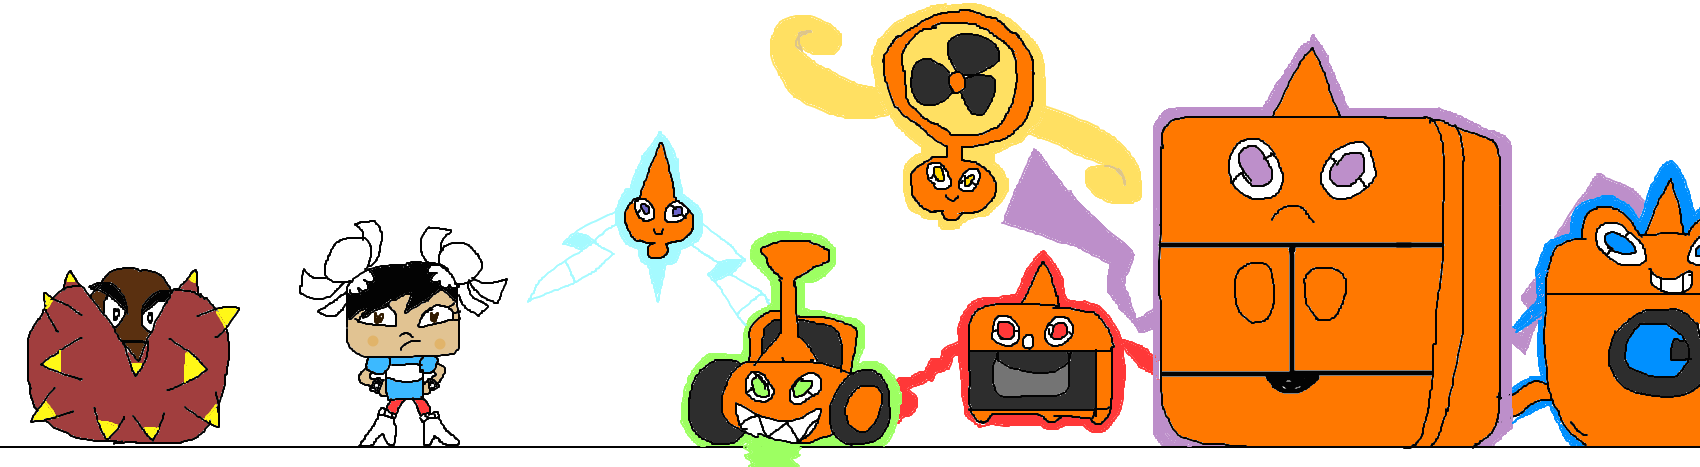 prickly goomba rotom and chunni by uniparrot20 on DeviantArt